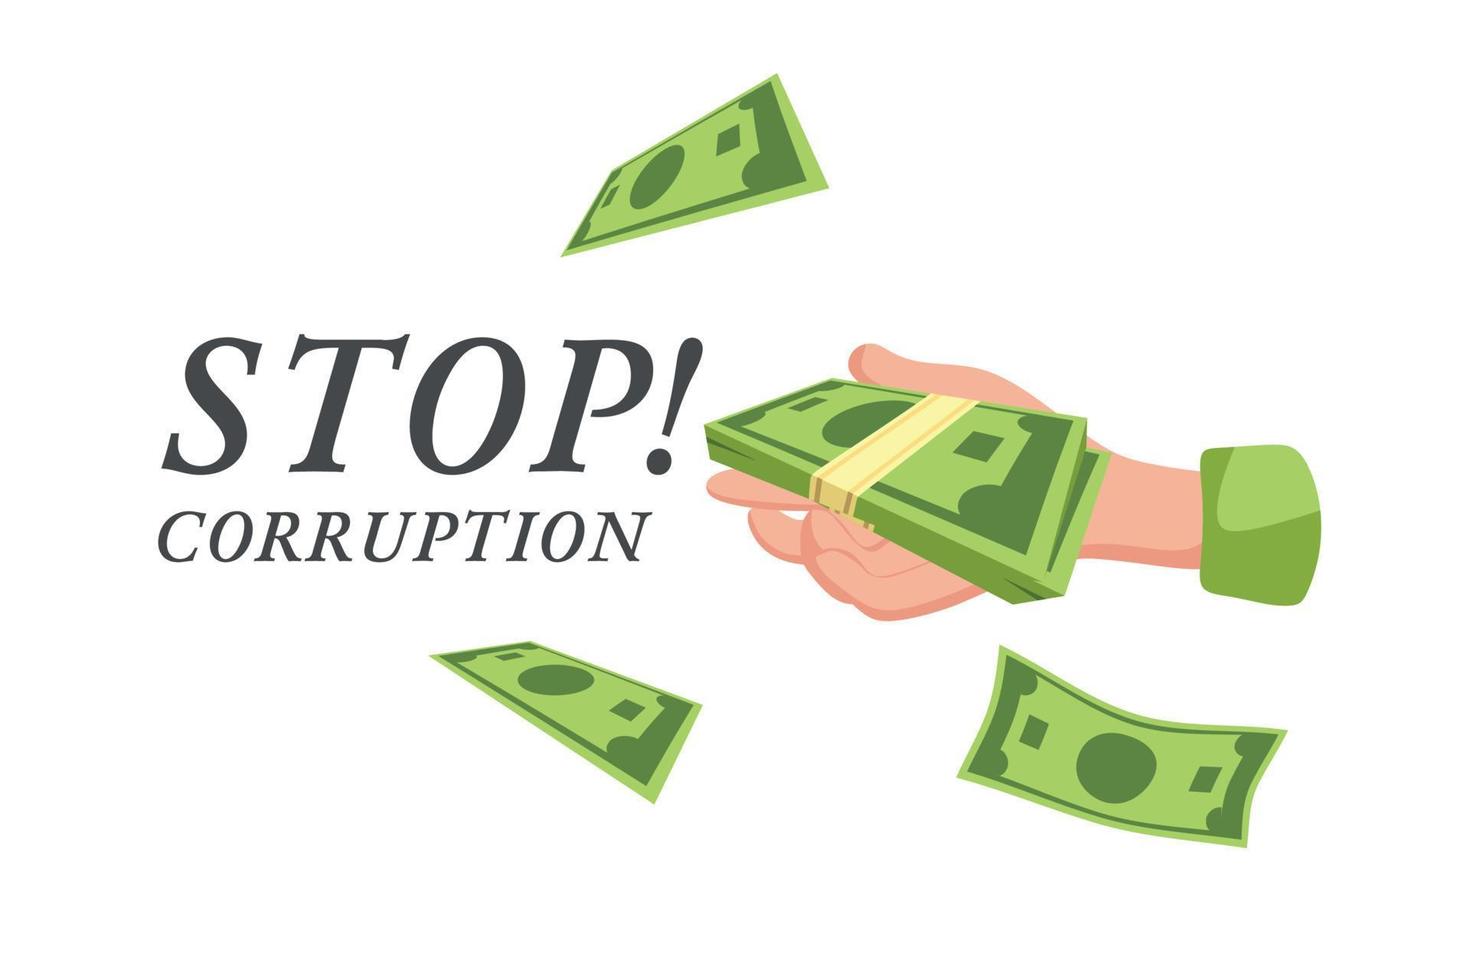 Stop corruption. A poster or publication on the Internet. Vector cartoon illustration